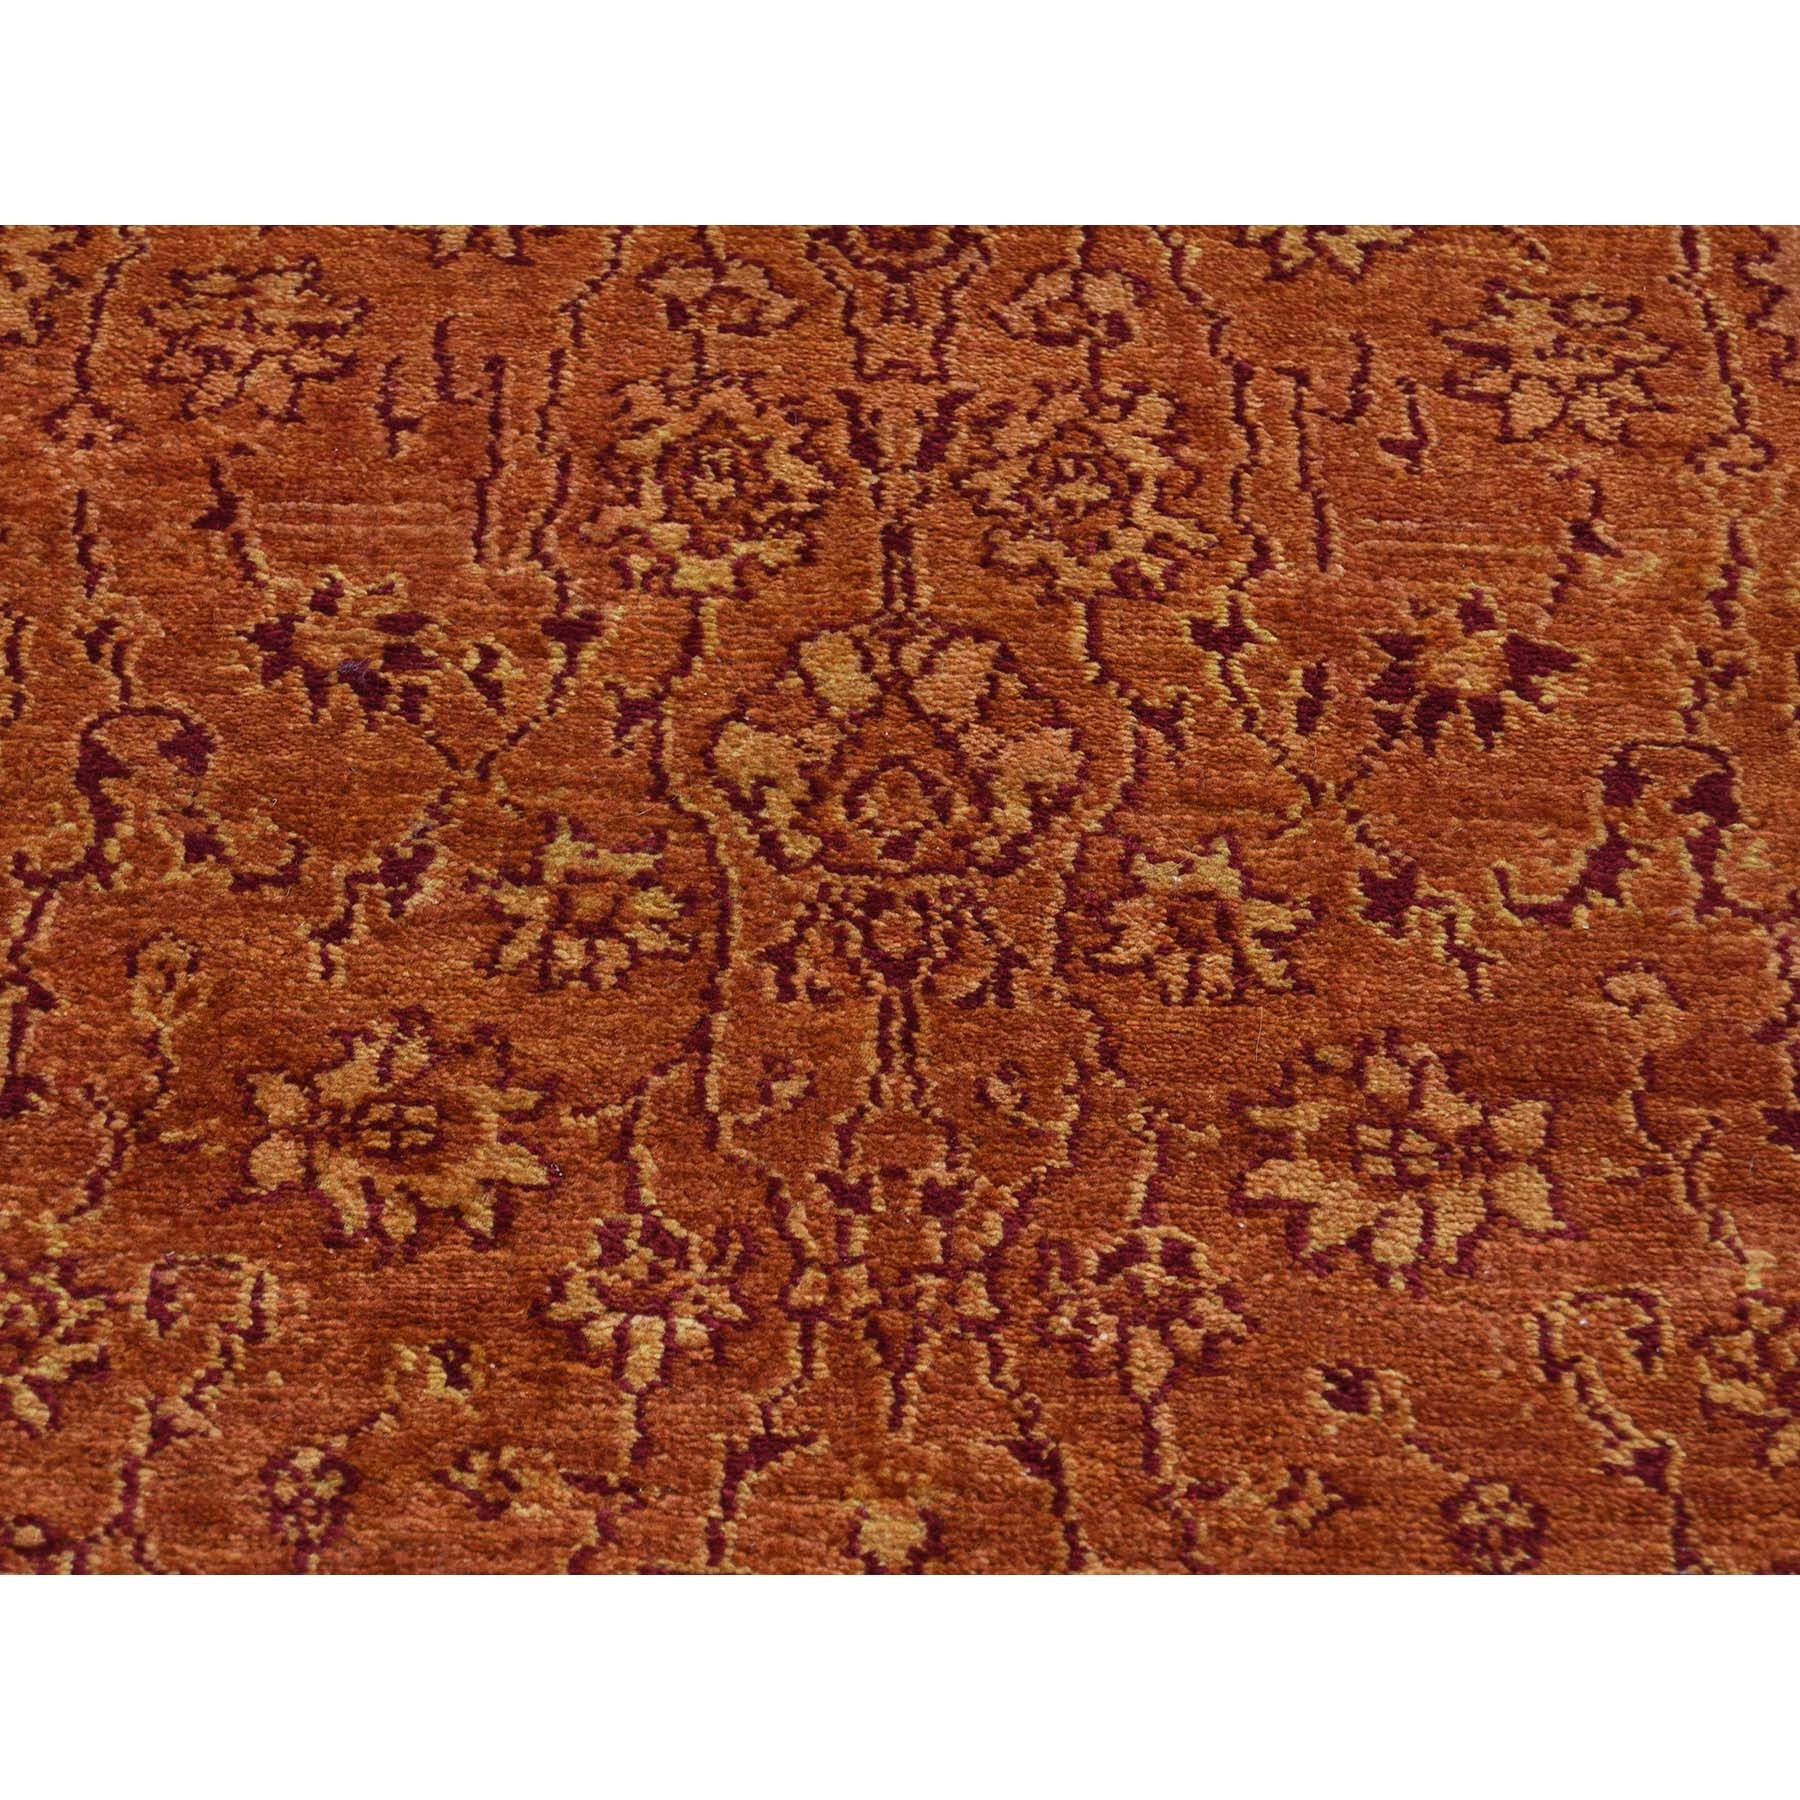 2-7 x16- Kashan Tone On Tone XL Runner Hand Knotted Oriental Rug 